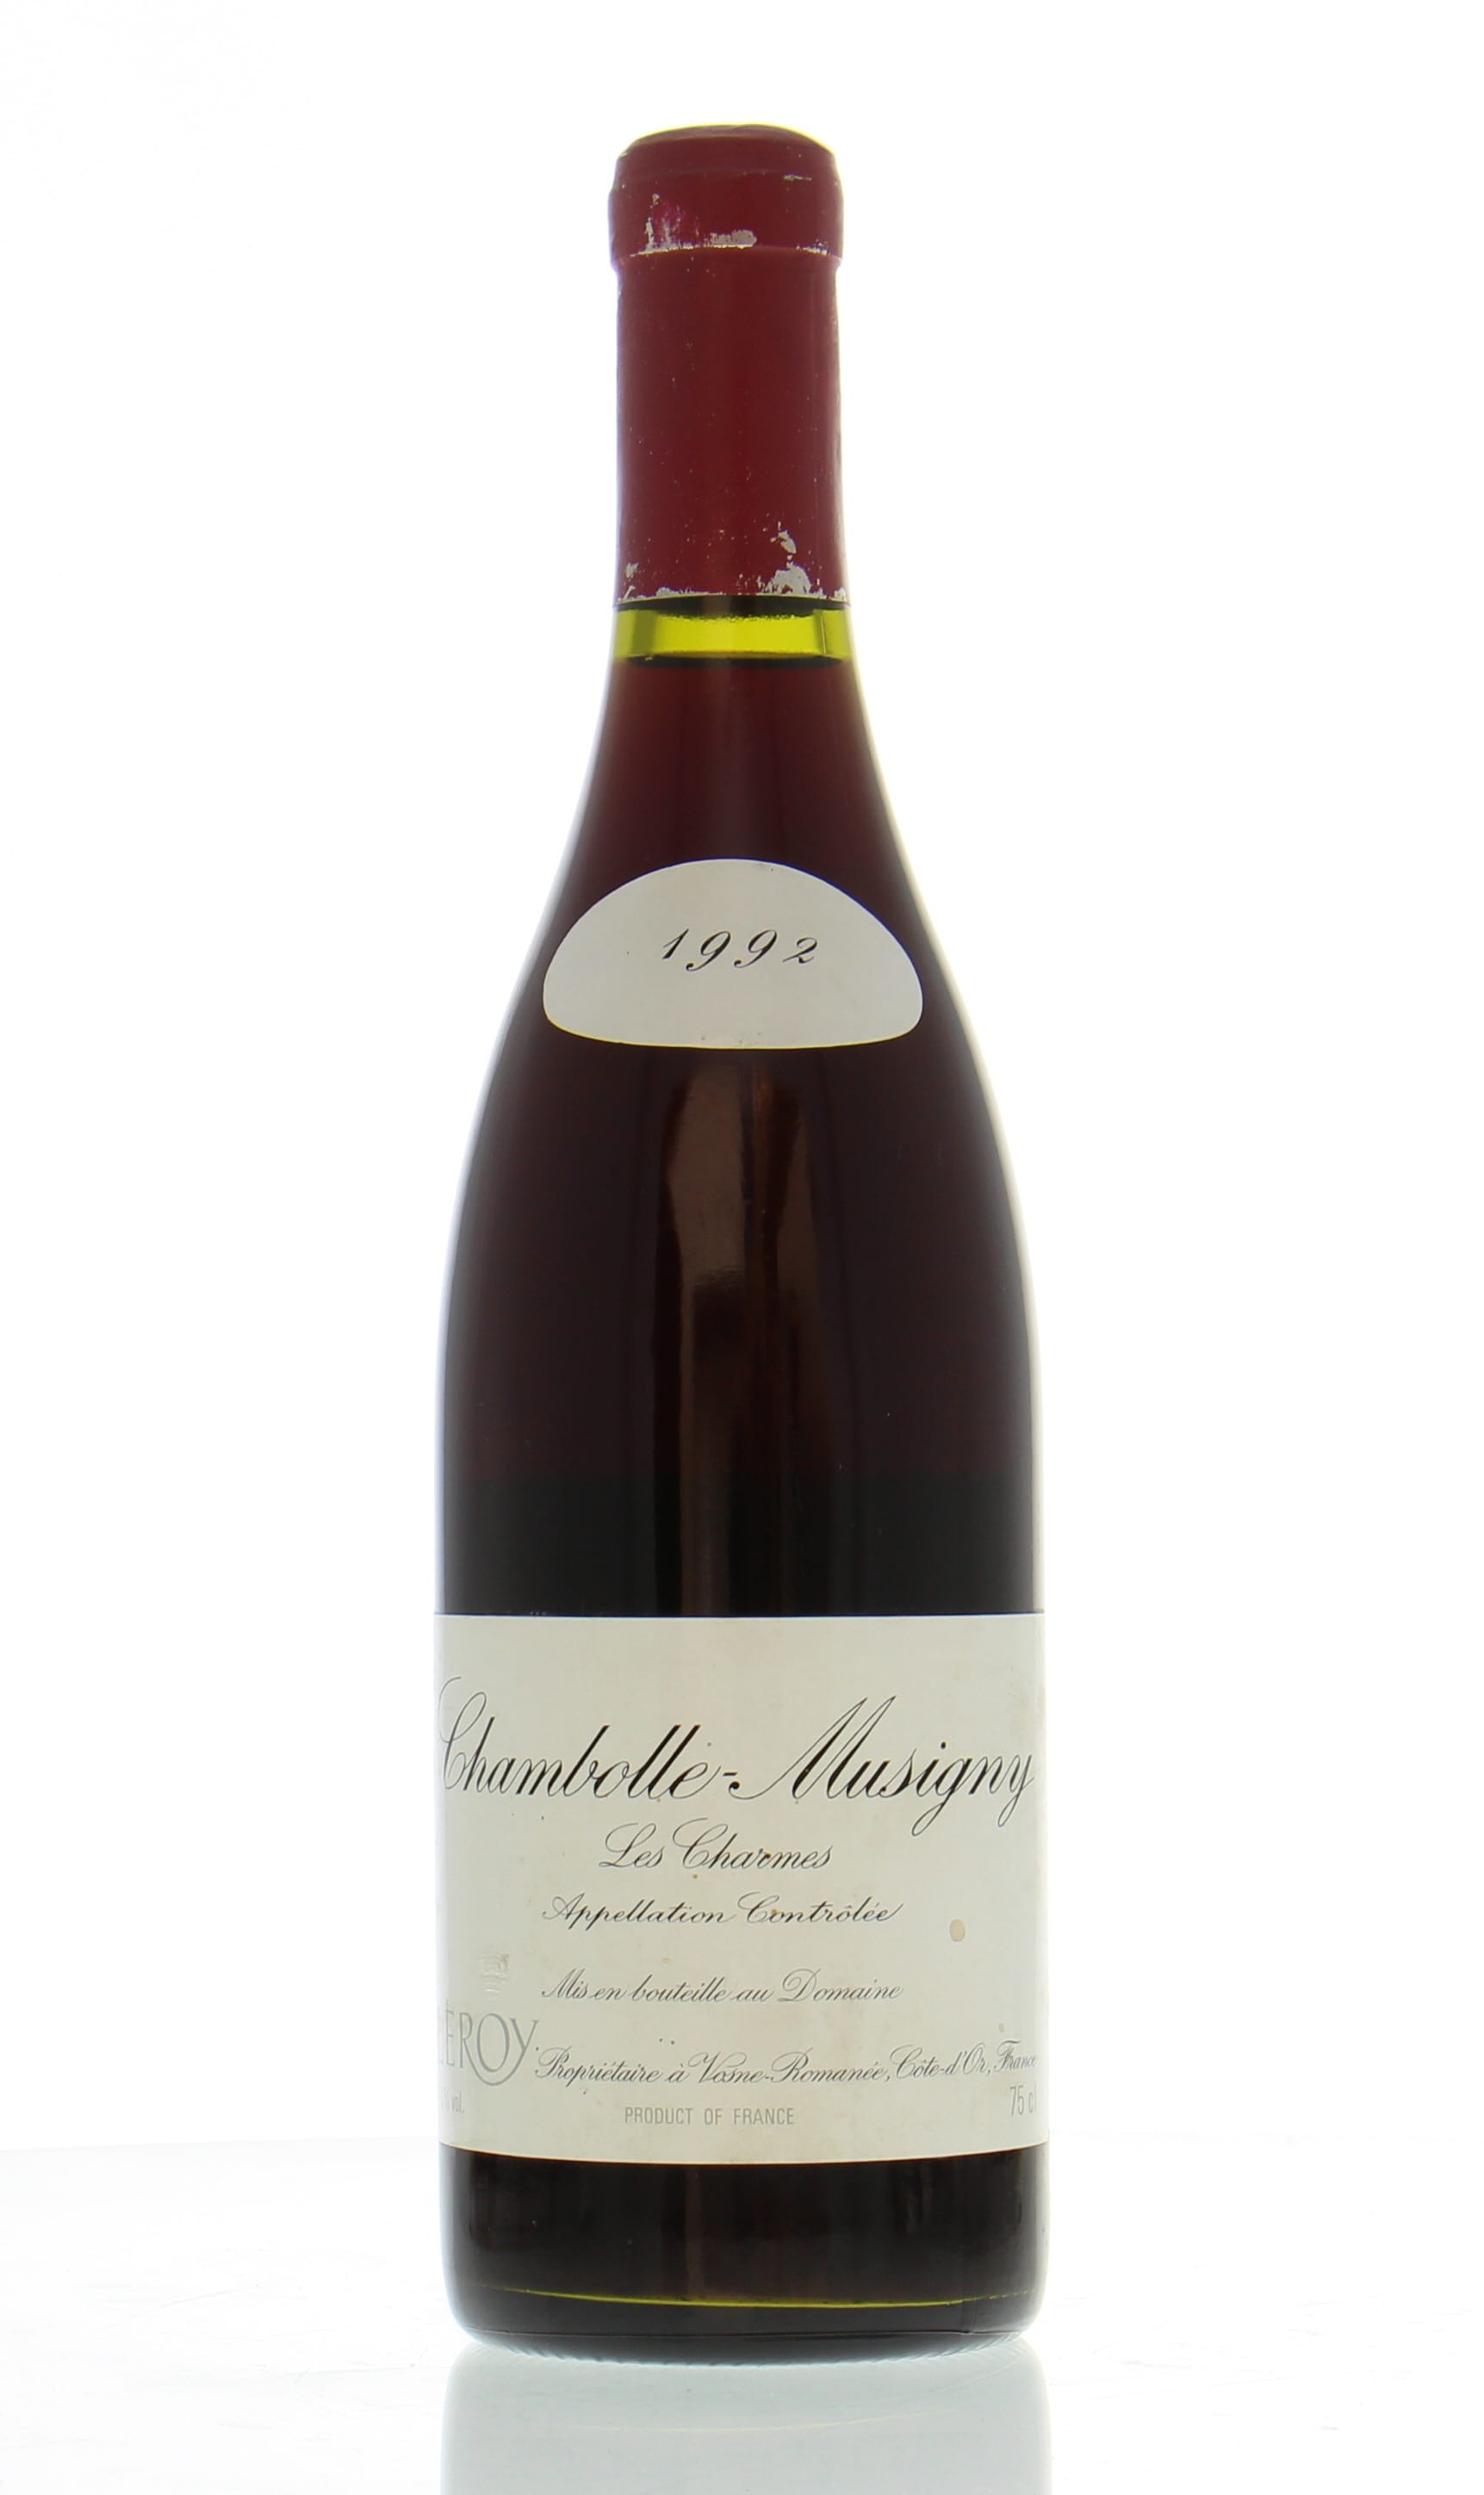 Domaine Leroy - Chambolle Musigny les Charmes 1992 Perfect